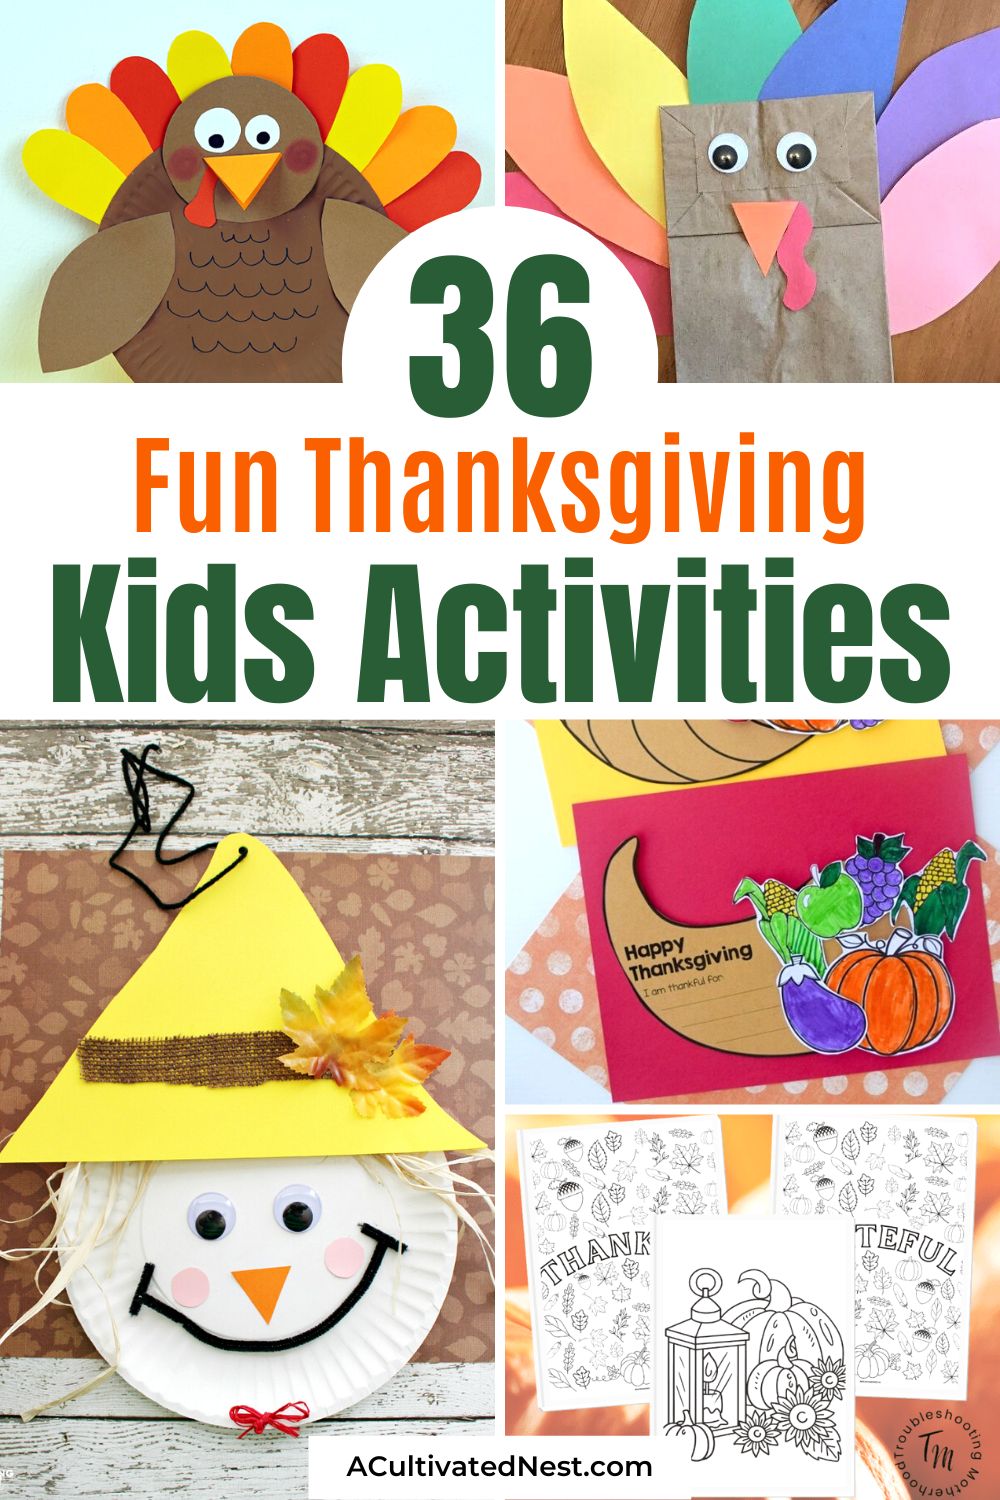 36 Fun Thanksgiving Kids Crafts- Looking for creative ways to celebrate Thanksgiving with your kids? Check out our collection of fun Thanksgiving kids crafts ideas, perfect for making lasting holiday memories. | #Thanksgiving #crafts #DIY #kidsCrafts #ACultivatedNest